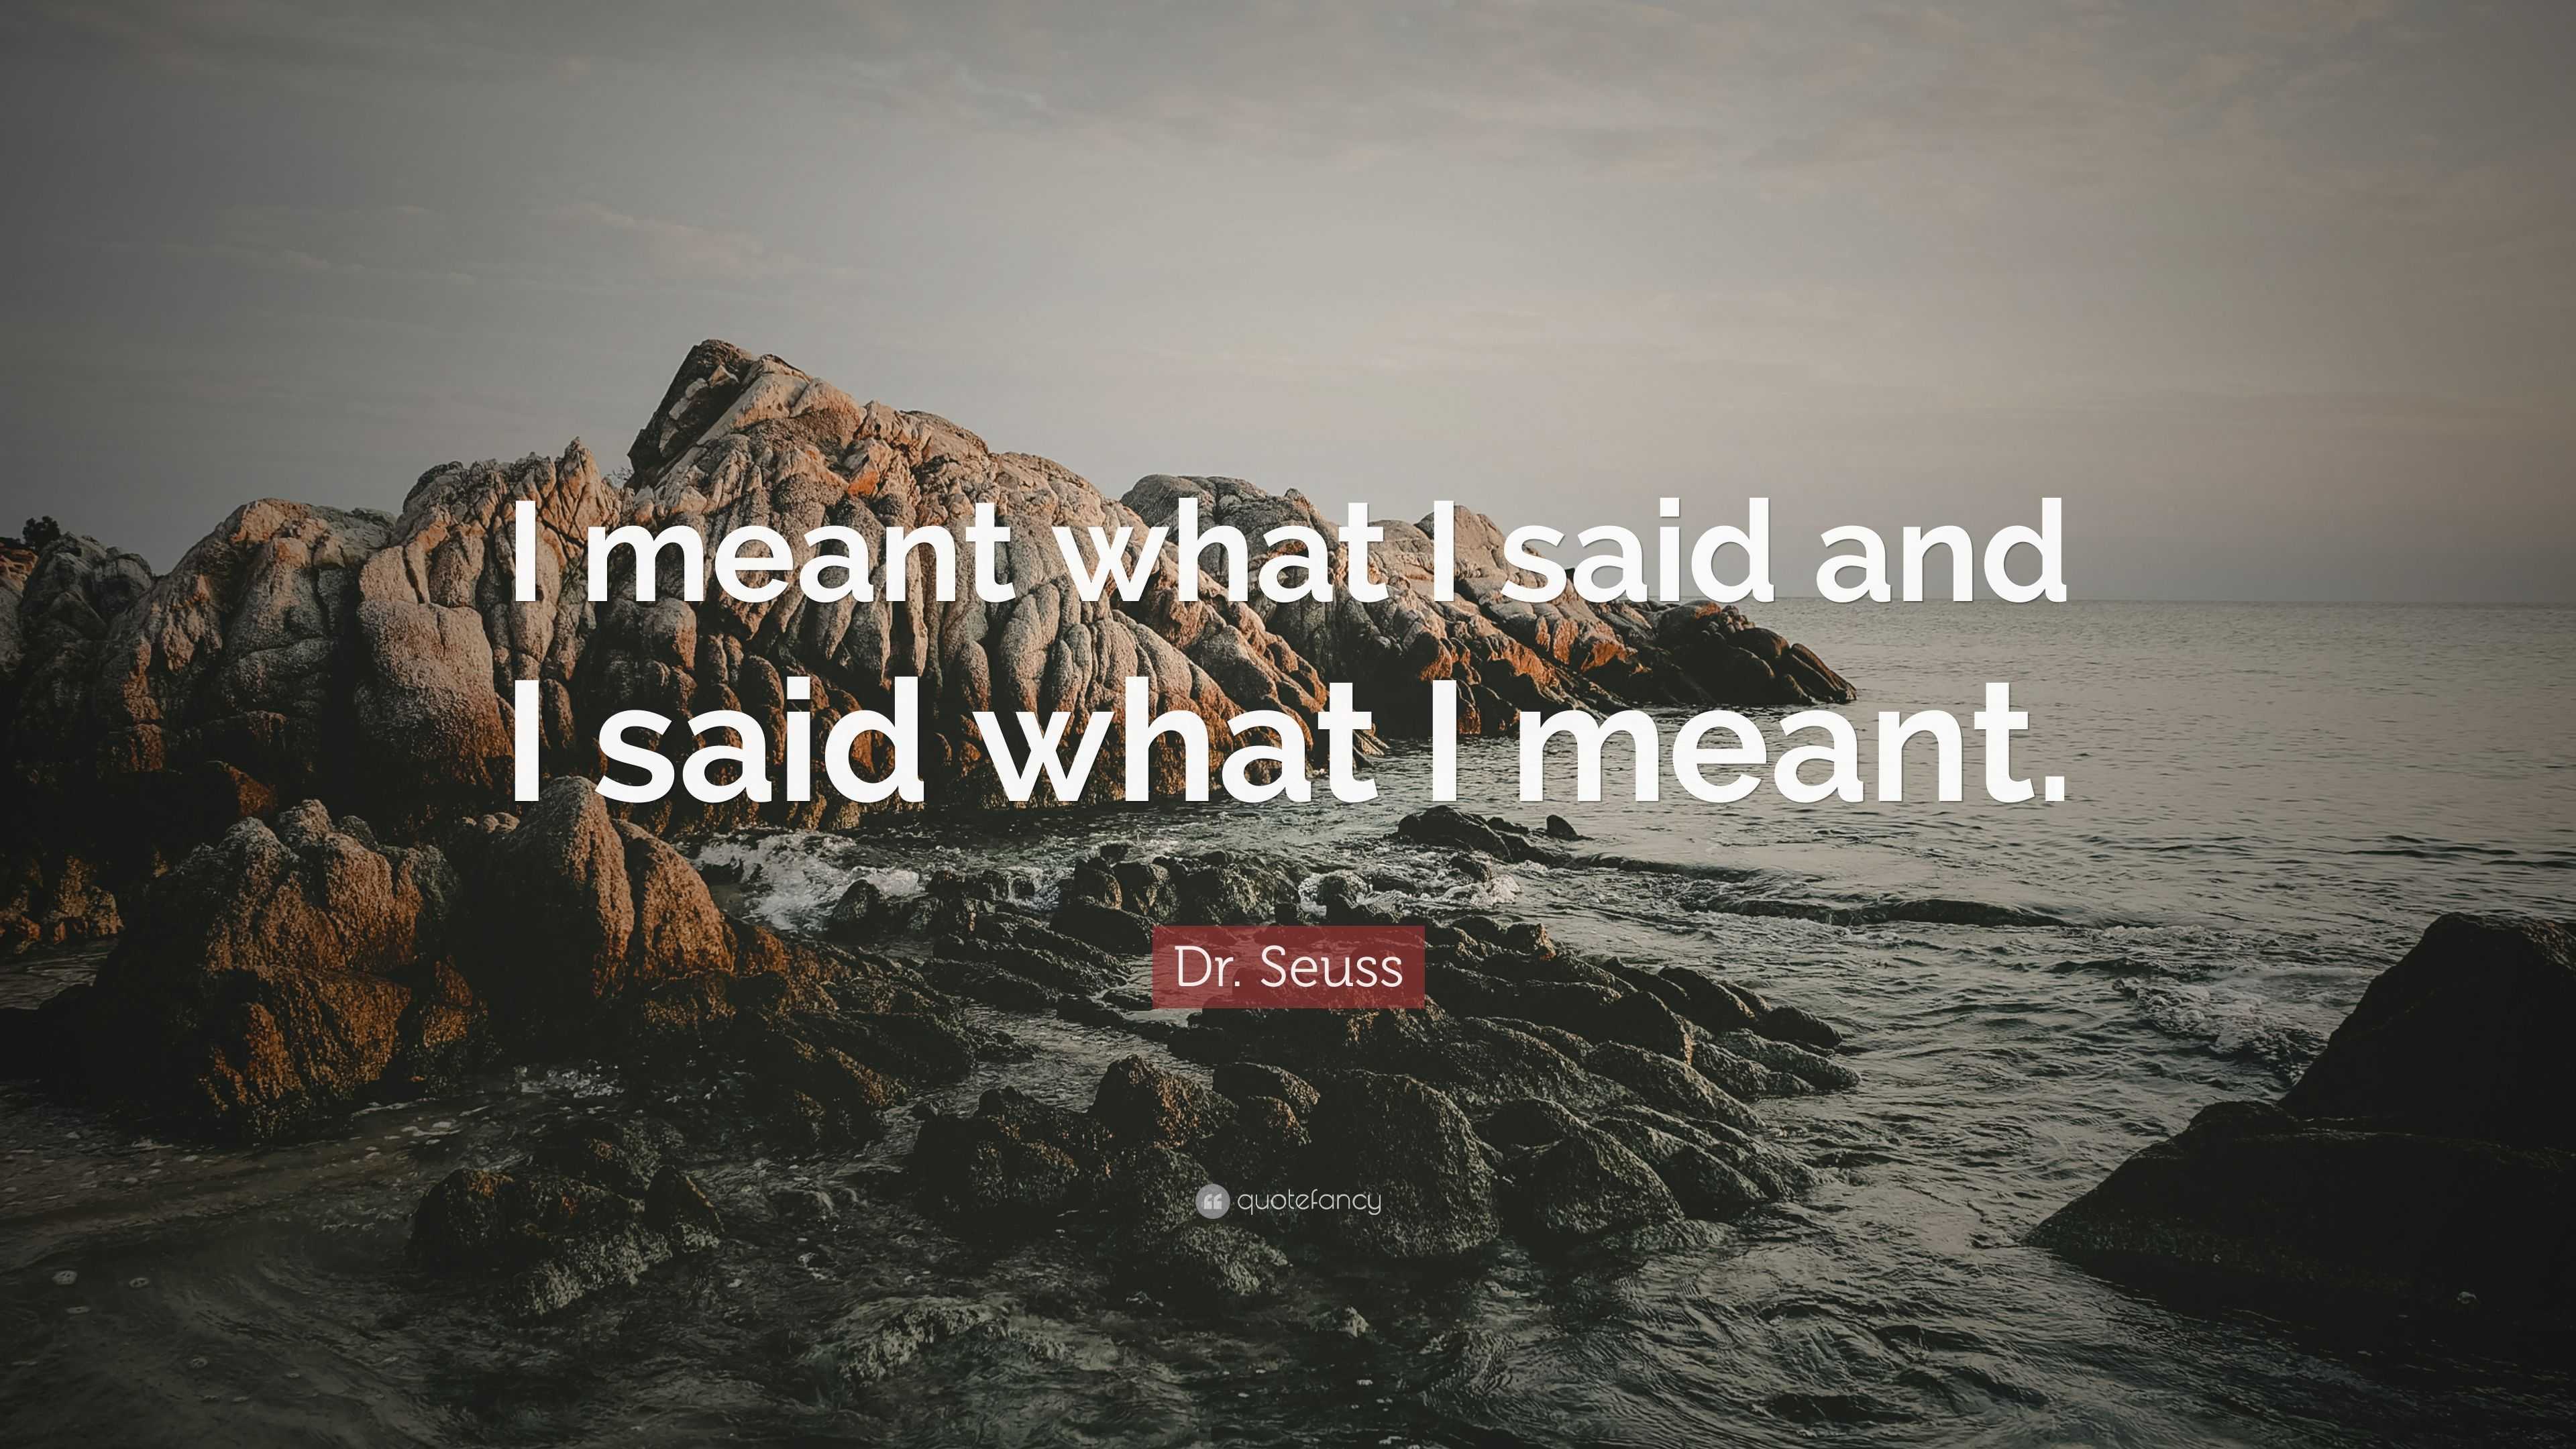 Dr. Seuss Quote: “I meant what I said and I said what I meant.”